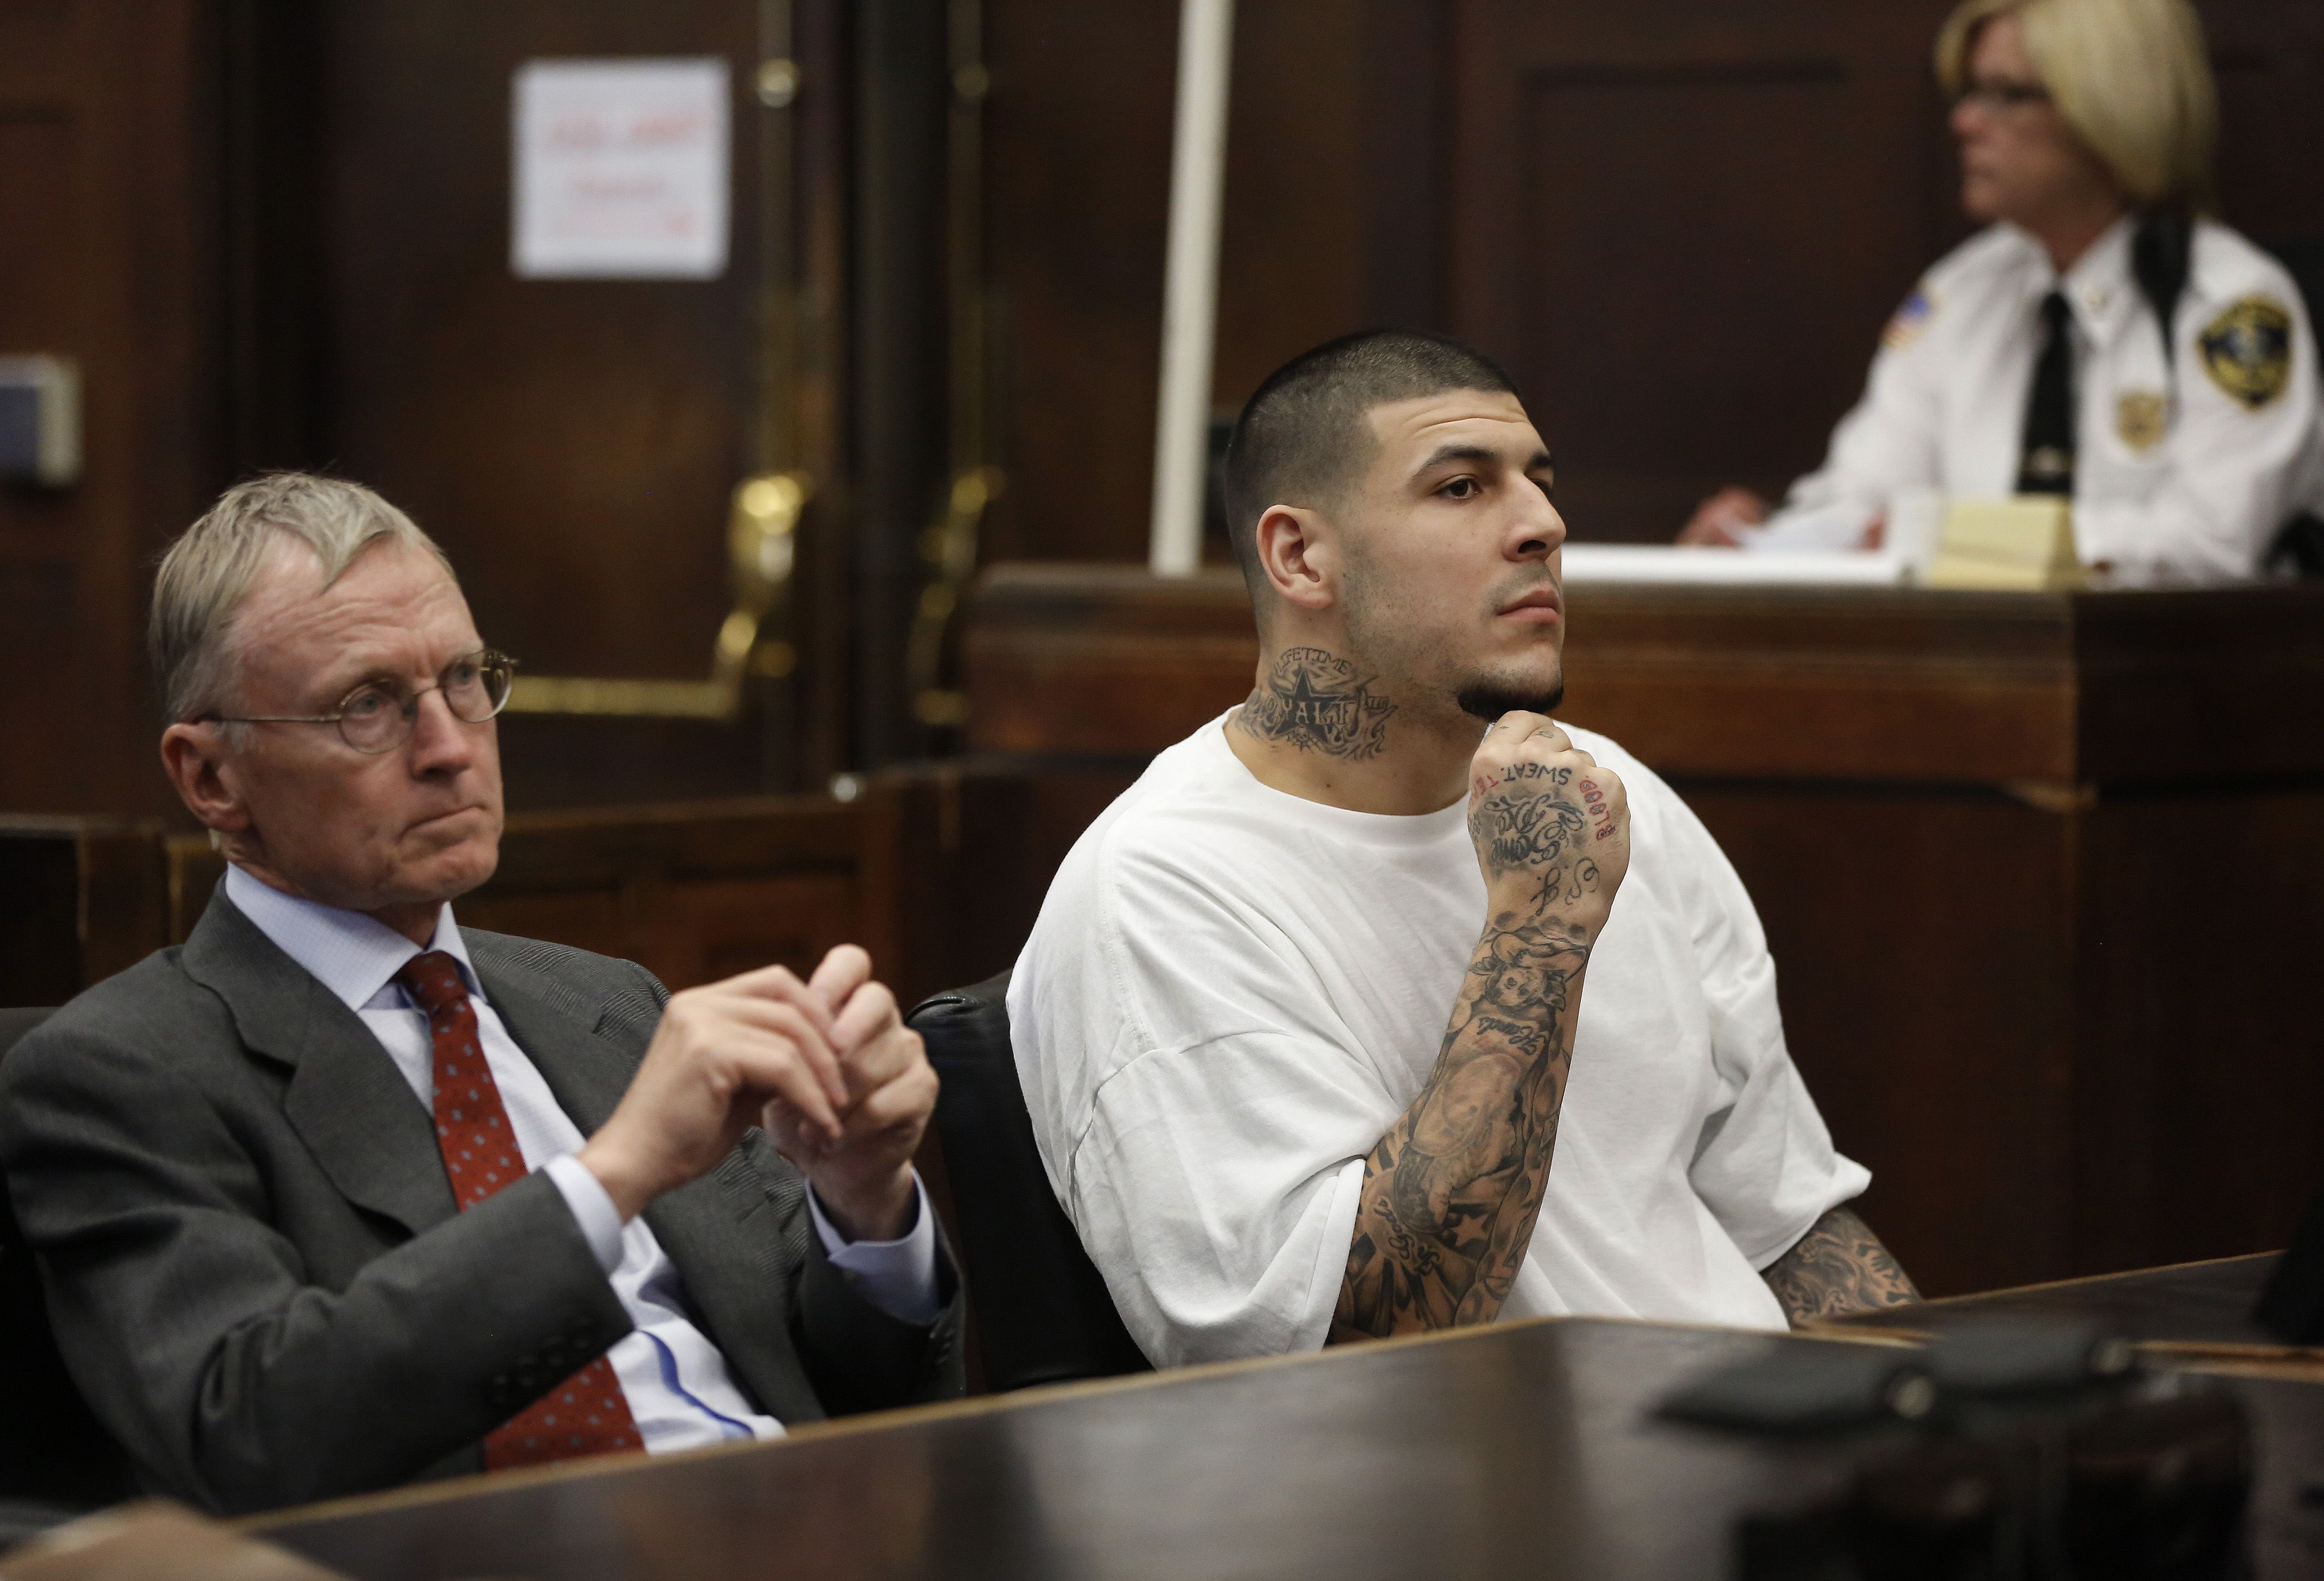 Aaron Hernandez, with 'Lifetime' tattoo, pleads not guilty to witness  intimidation - ESPN